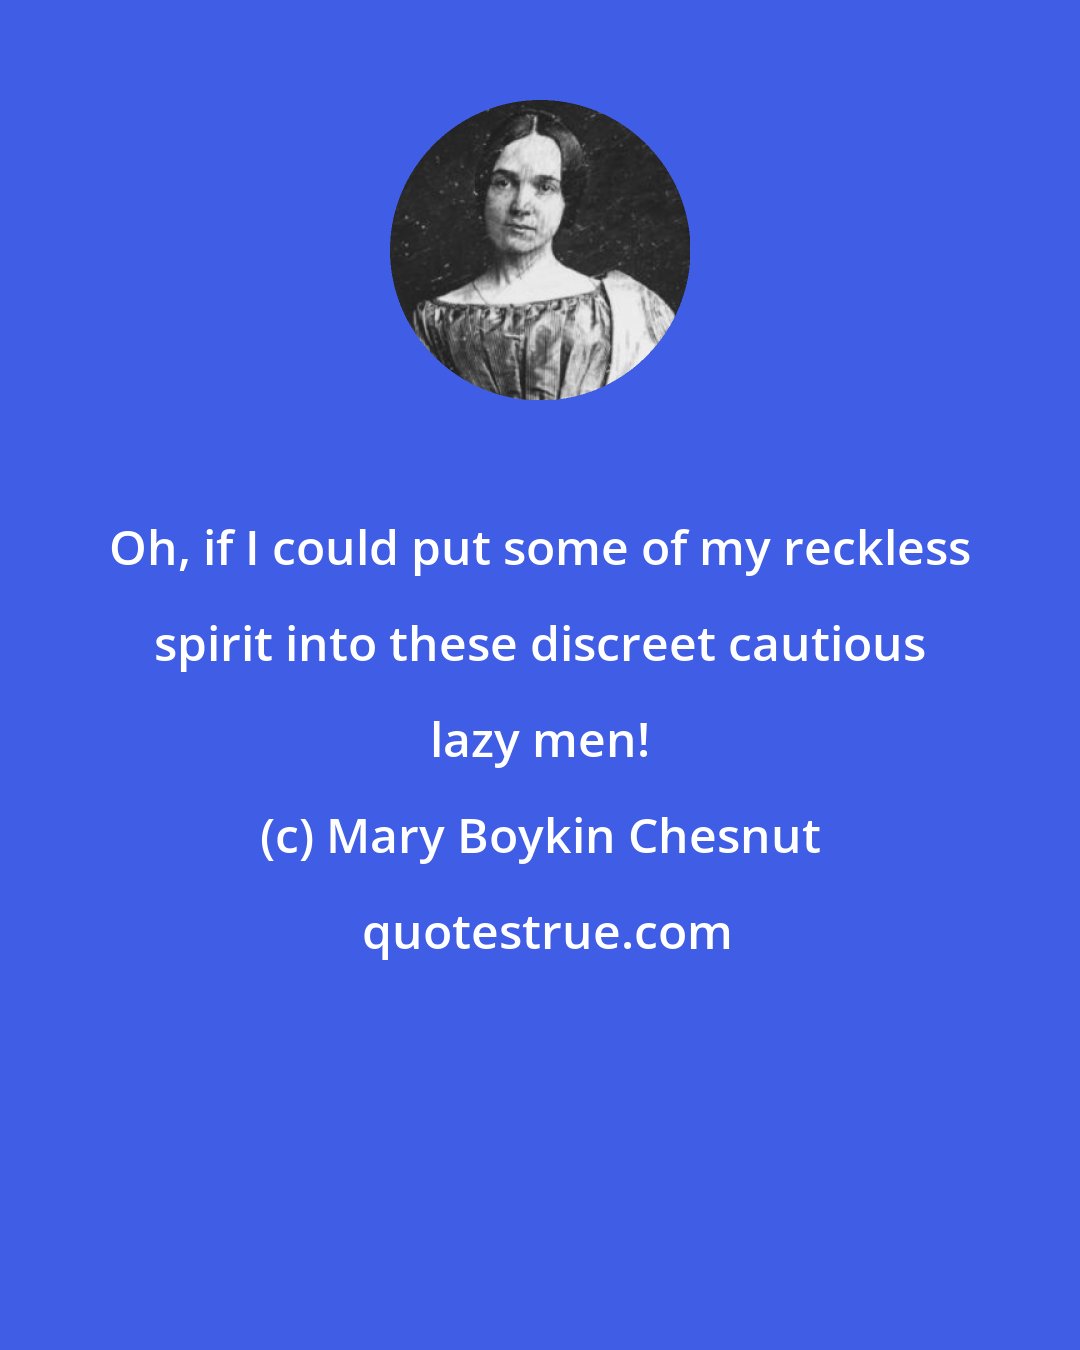 Mary Boykin Chesnut: Oh, if I could put some of my reckless spirit into these discreet cautious lazy men!